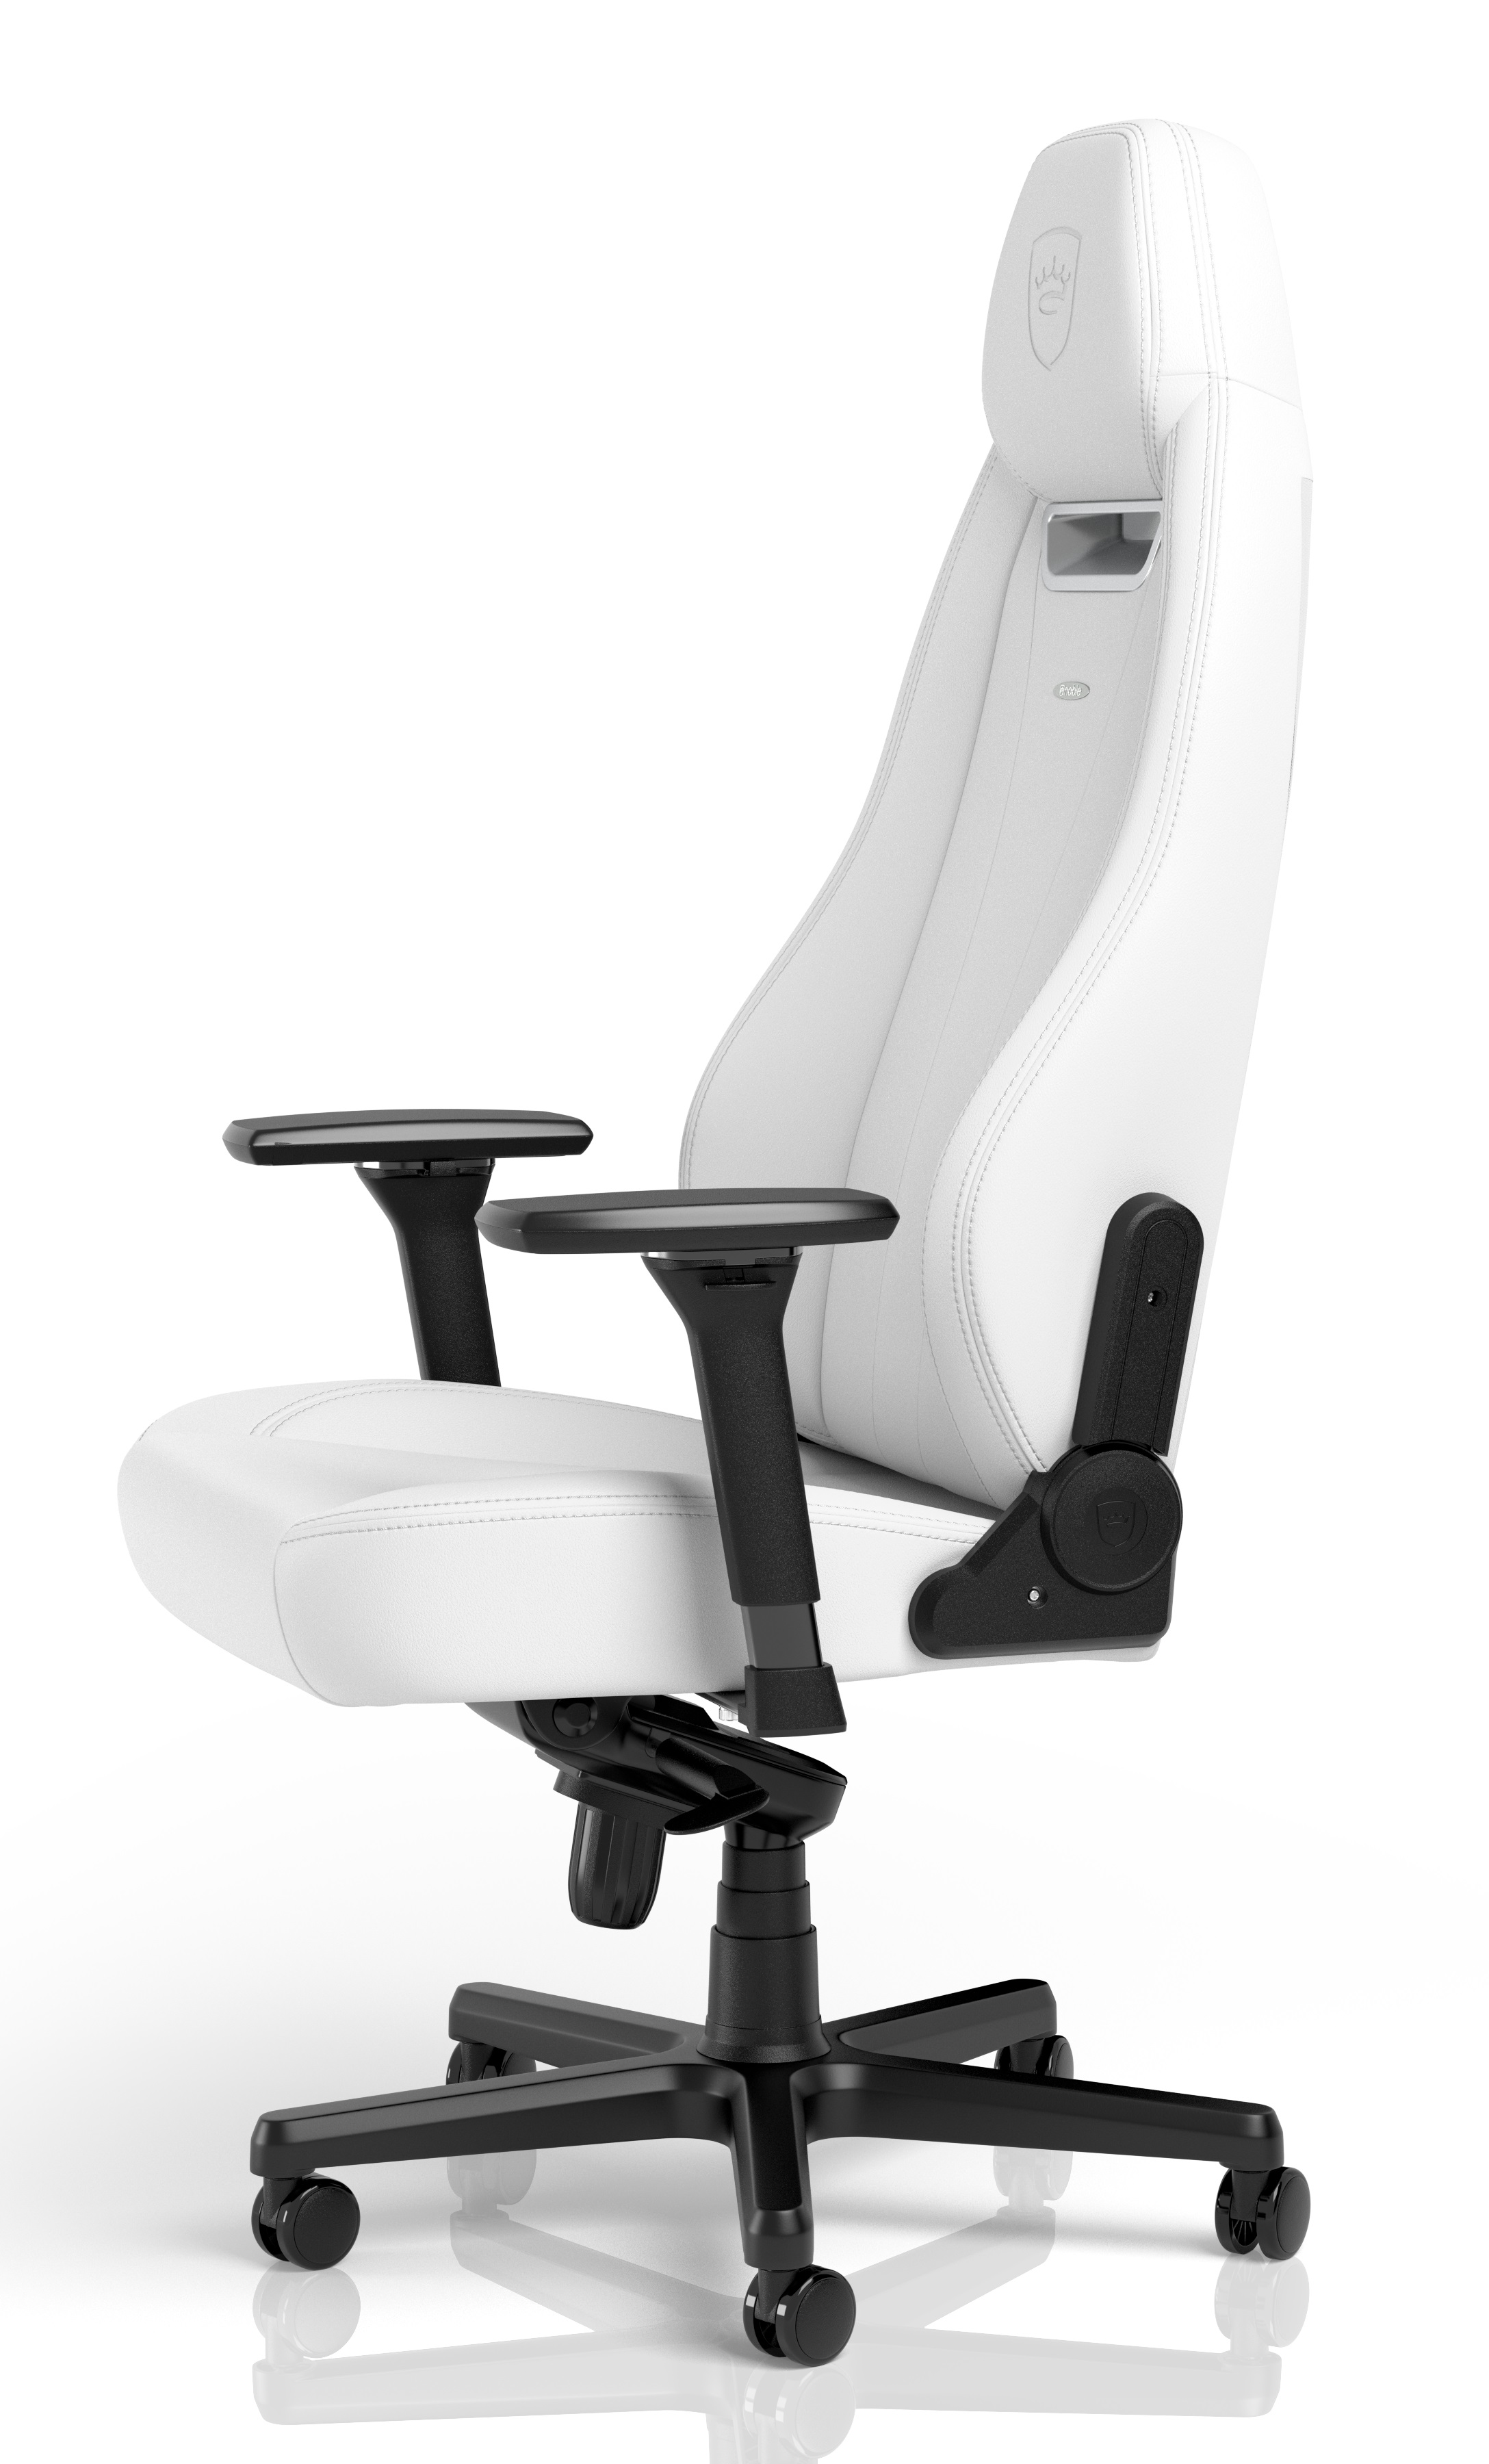 noblechairs - noblechairs LEGEND Gaming Chair White Edition – High-tech PU Leather